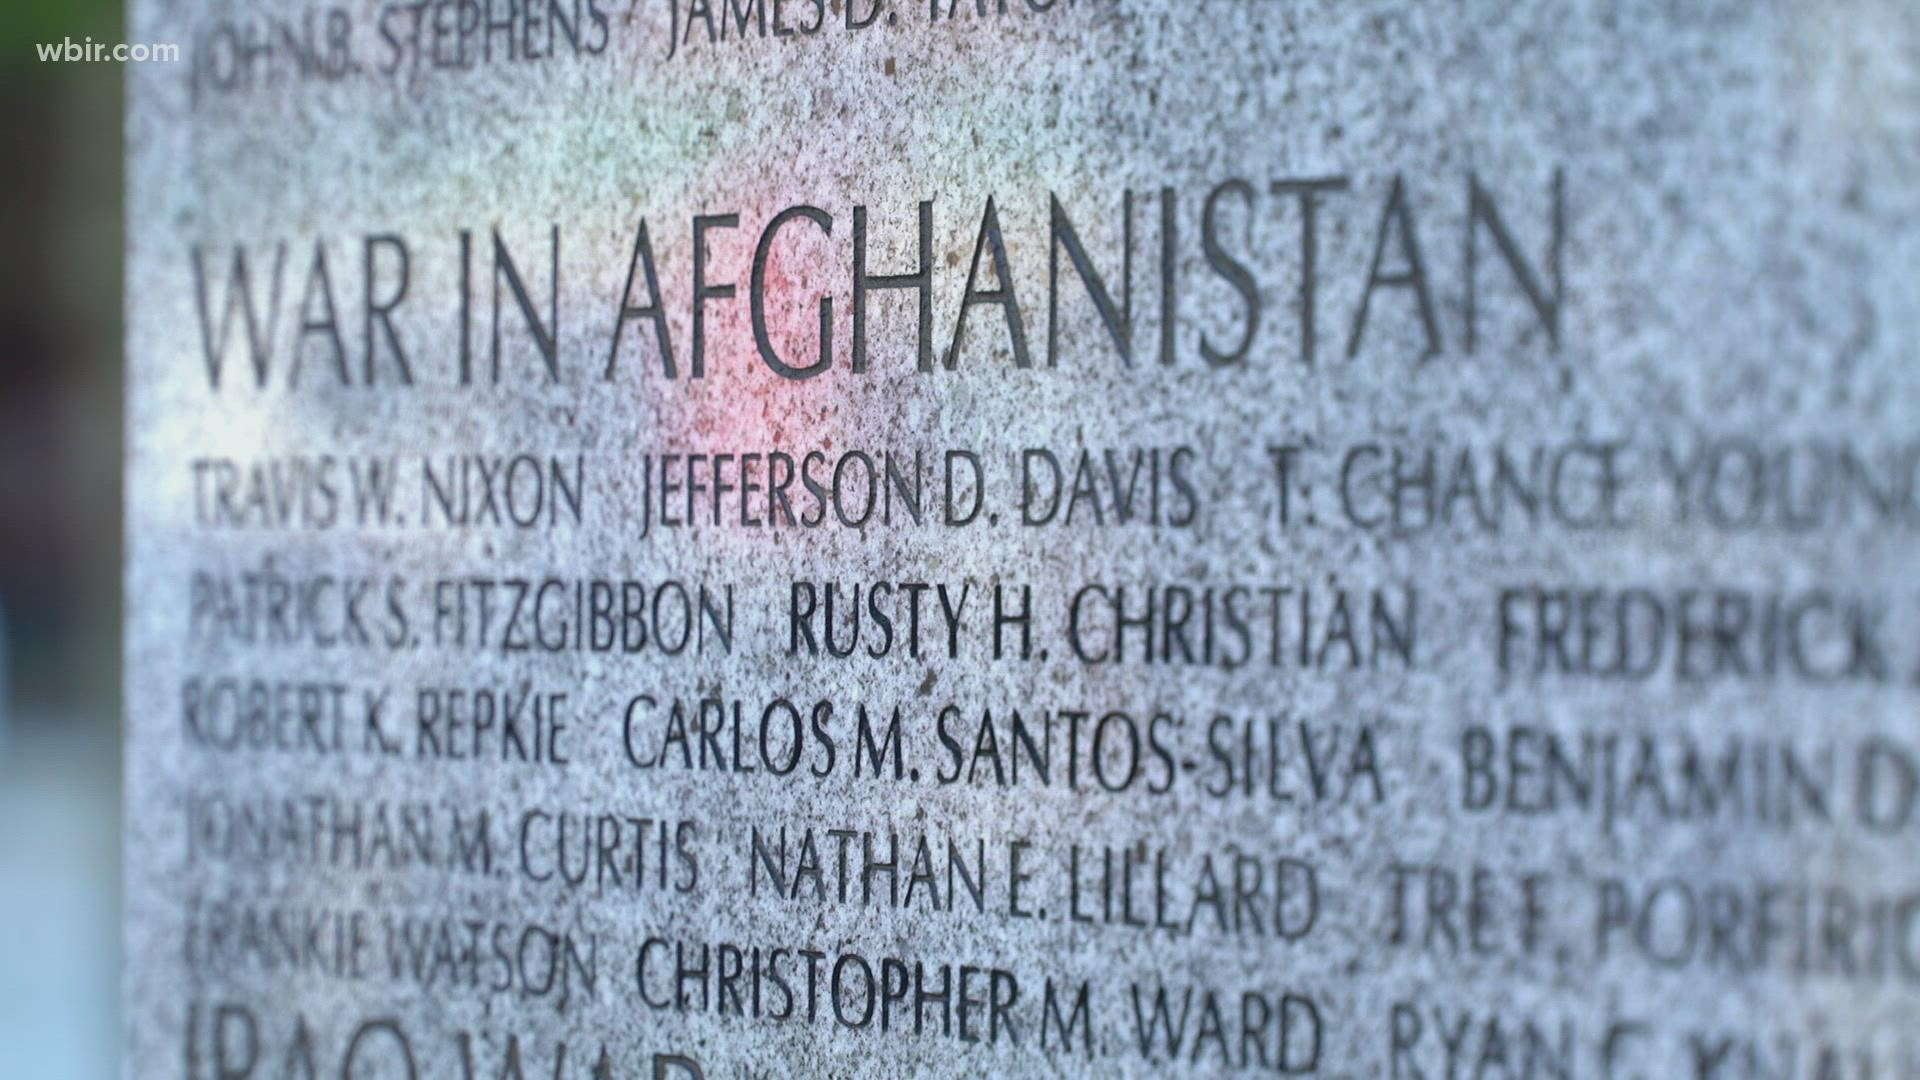 Staff Sgt. Ryan Knauss was the last service member to die in Afghanistan, as the U.S. pulled military forces out of the country./